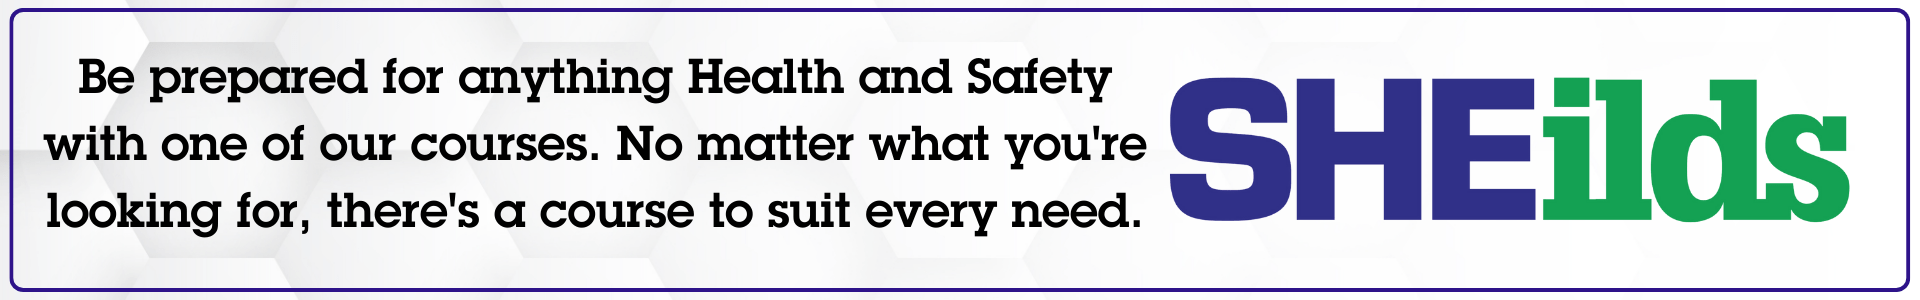 Be prepared to respond to anything with our Health and Safety Courses.